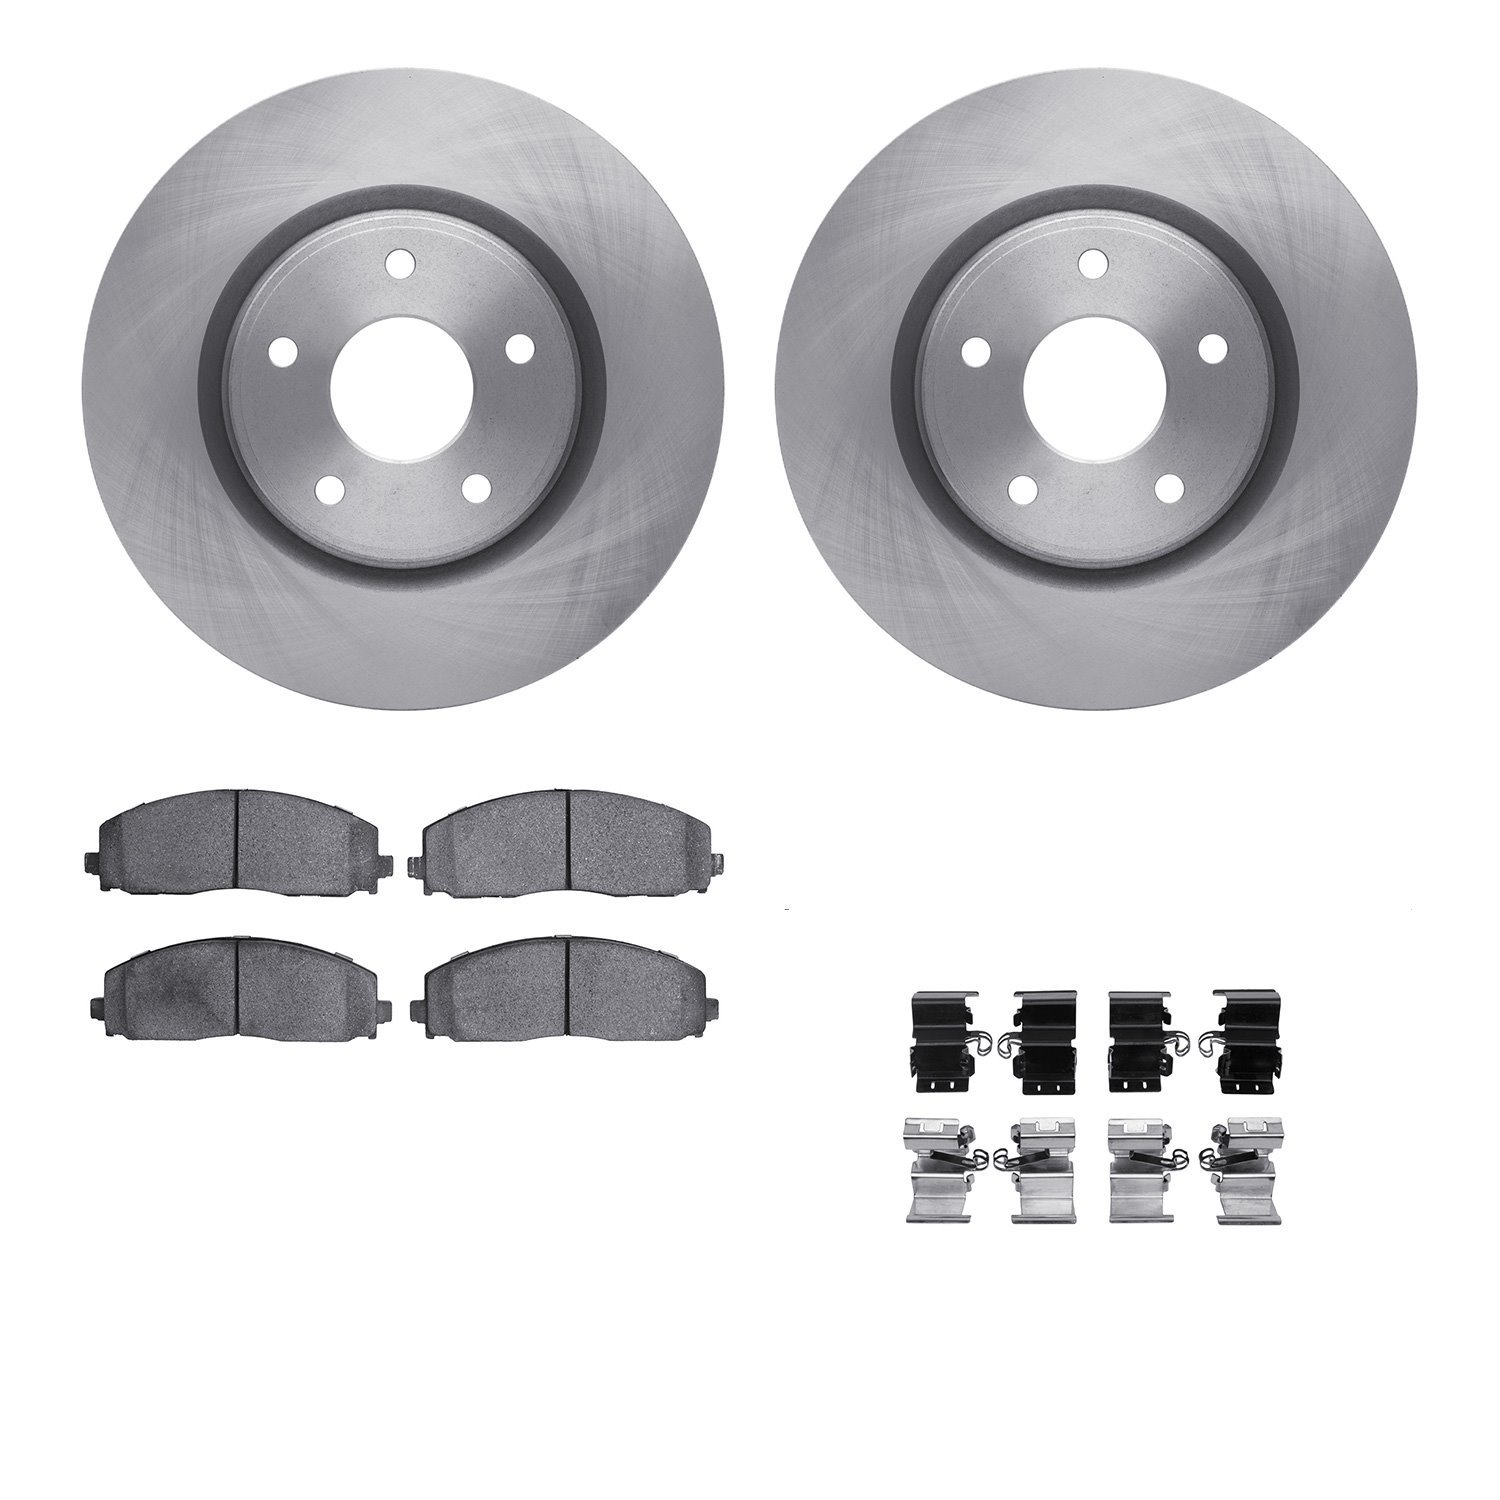 6612-40017 Brake Rotors w/5000 Euro Ceramic Brake Pads Kit with Hardware, Fits Select Multiple Makes/Models, Position: Front